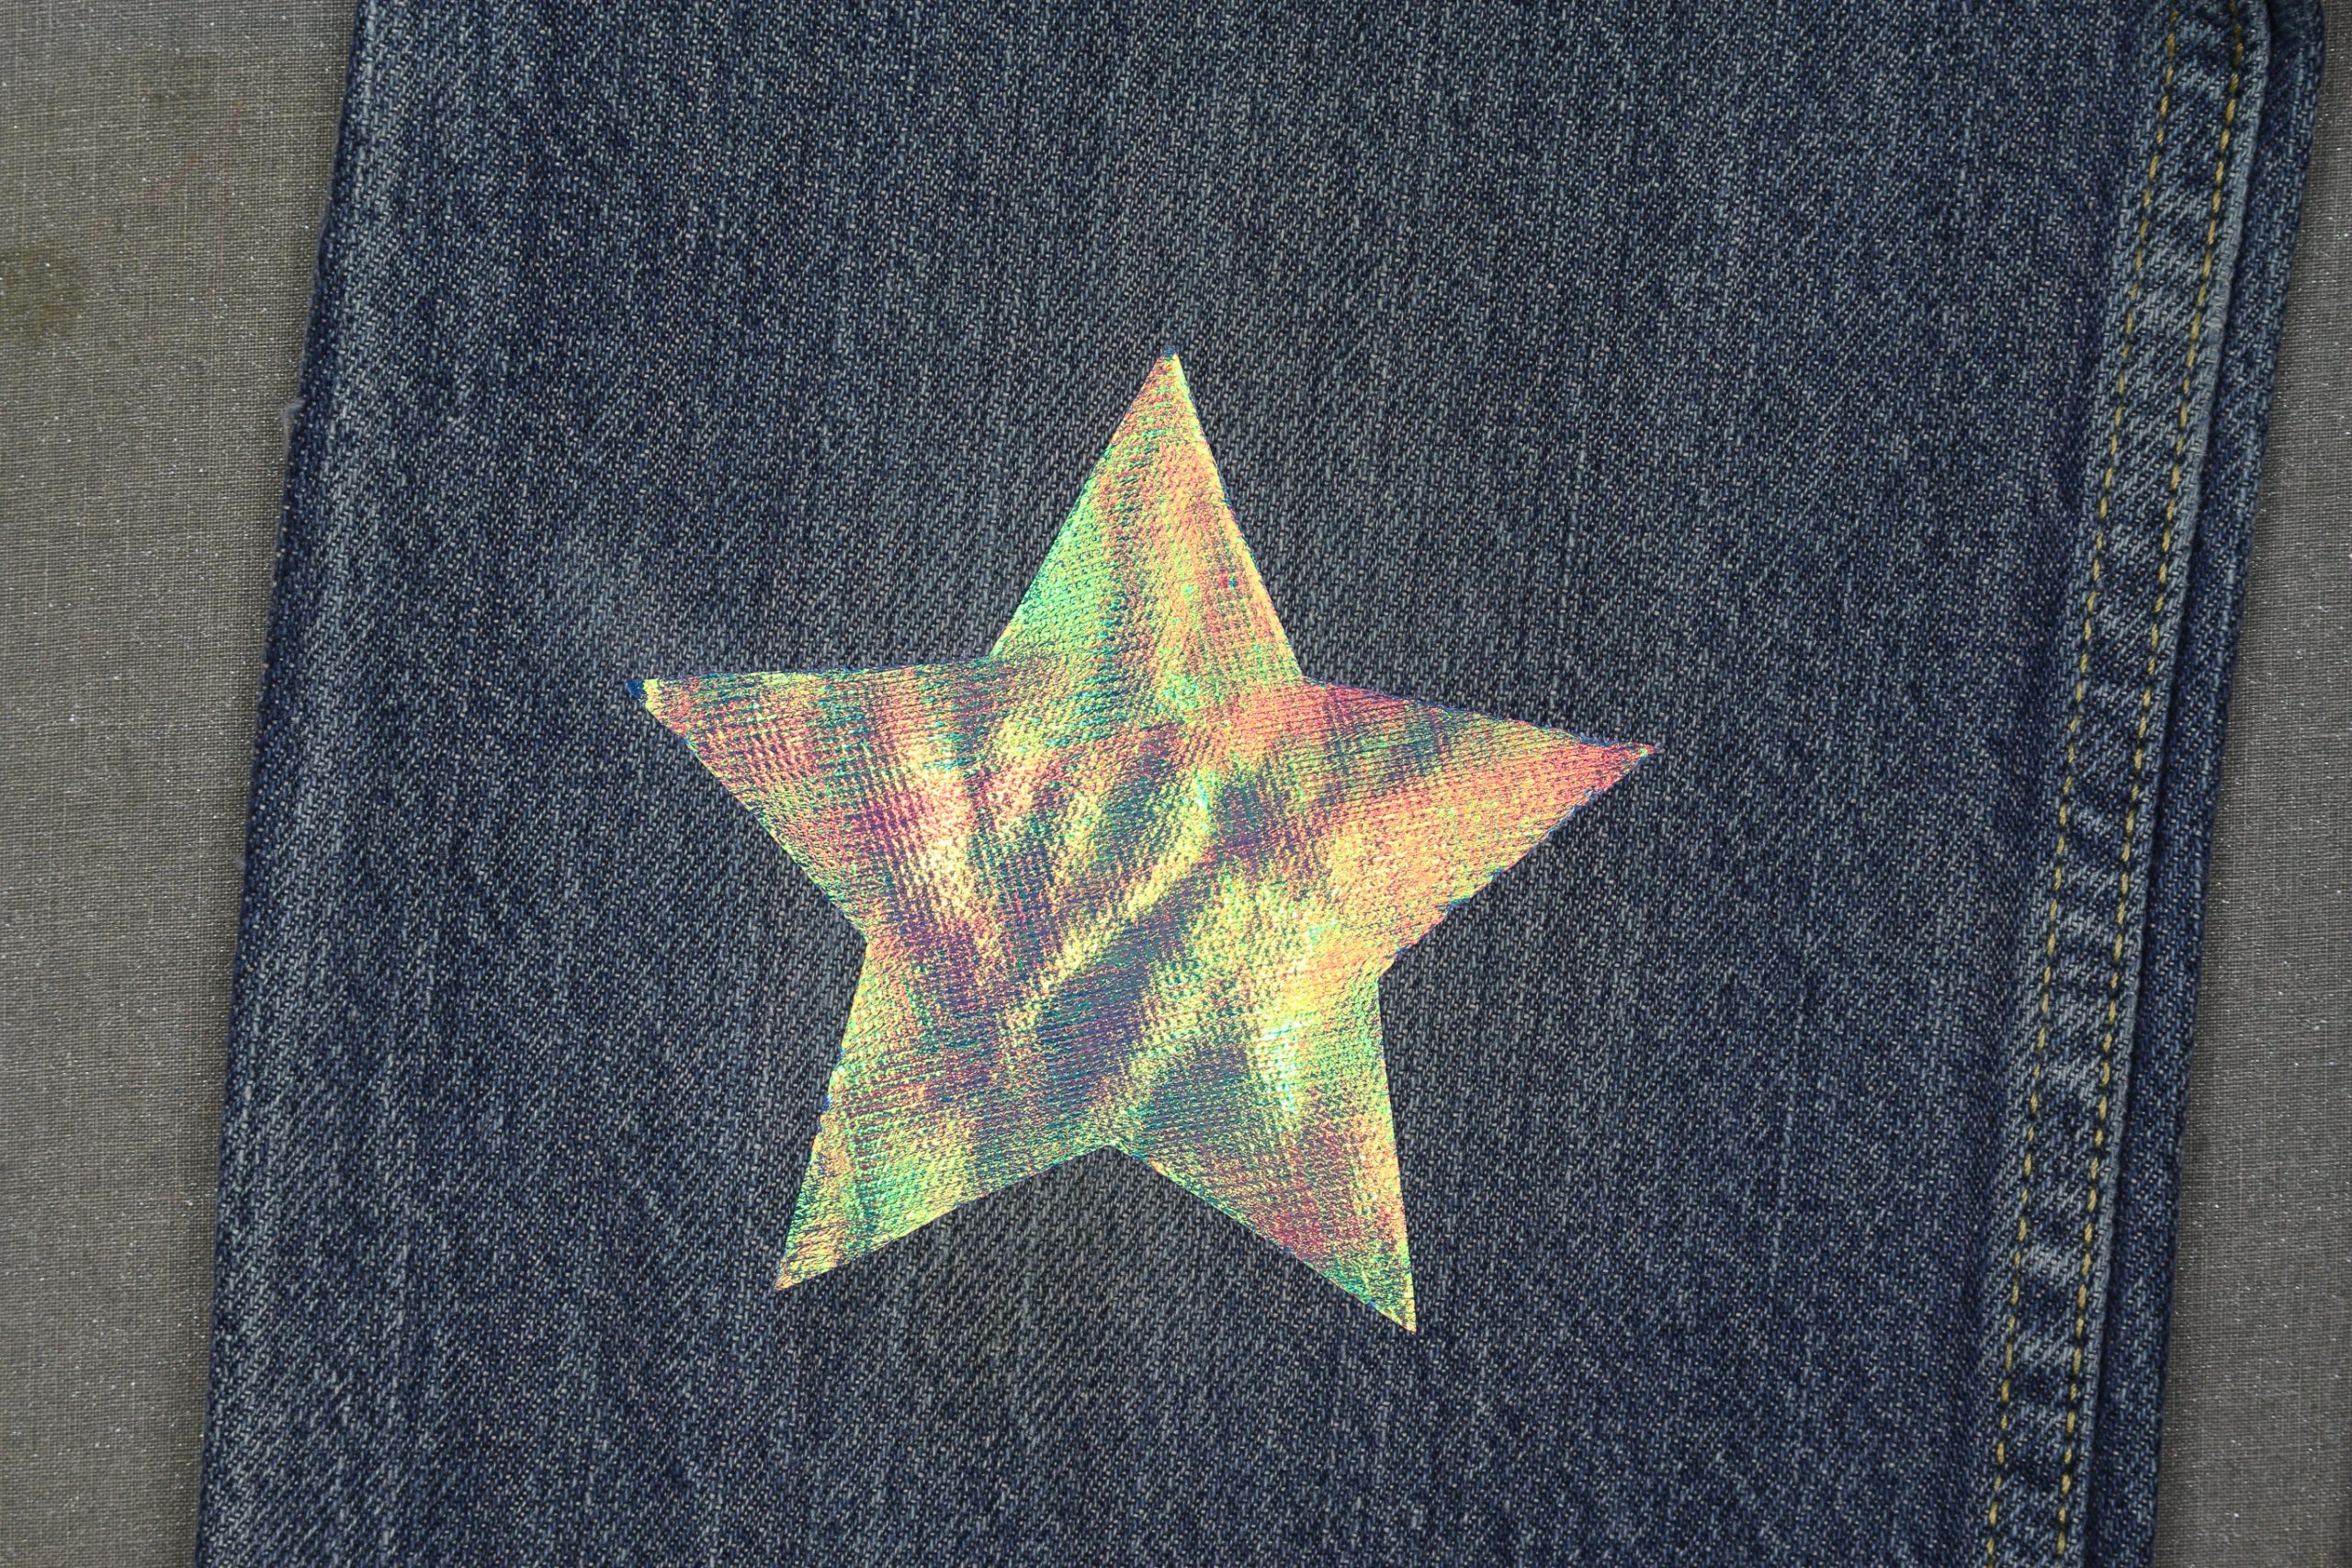 star shaped iridescent patch on jeans